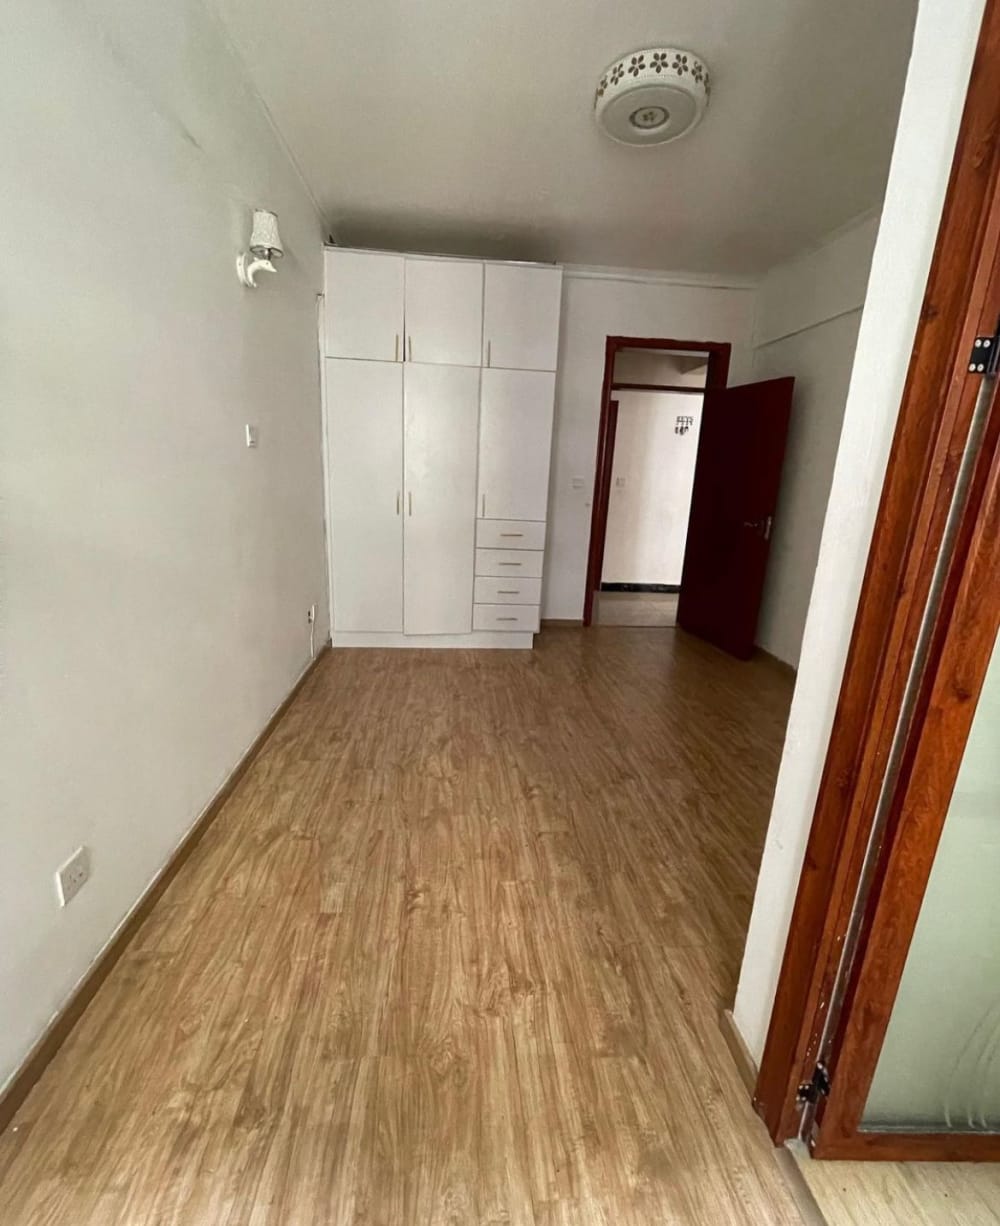 3 bedroom Apartment for rent in Rent a 3 Bedroom at Skyhorse apartments along  Wood avenue Kilimani  -Nairobi